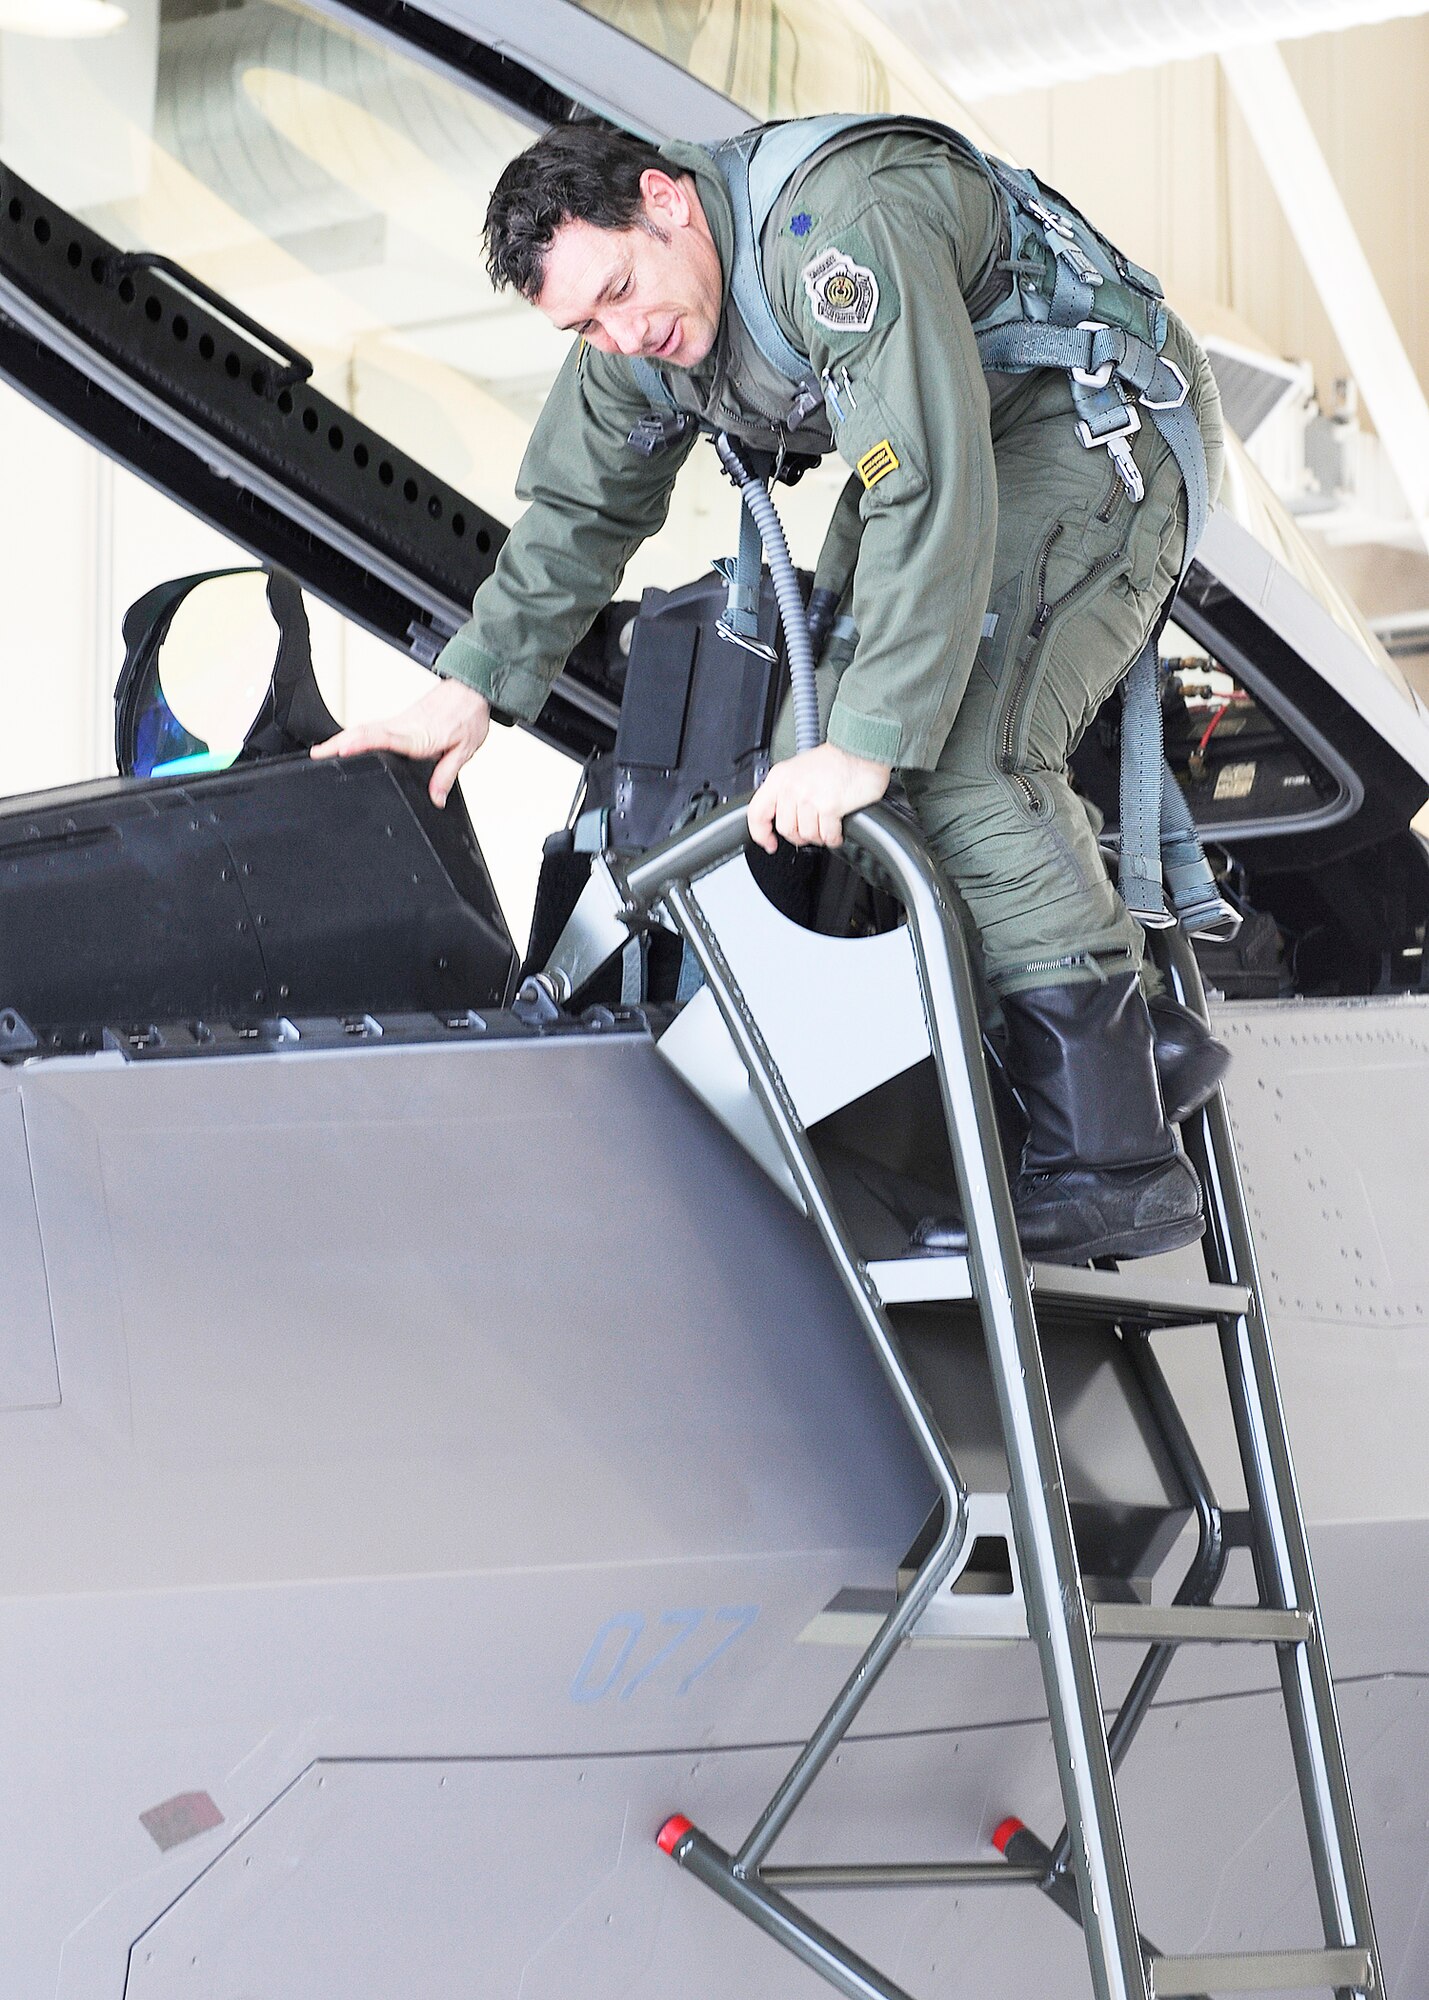 Lt. Col. Craig Baker exits the first F-22 Raptor assigned to the 8th Fighter Squadron after flying it to Holloman Air Force Base, N.M., Dec. 21, 2009. The arrival of 8th FS flagship starts the next chapter of the storied history of the Black Sheep that began in 1941 when the squadron was assigned to the 49th Pursuit Group. Colonel Baker is the 8th Fighter Squadron commander. (U.S. Air Force photo/Senior Airman John D. Strong II)